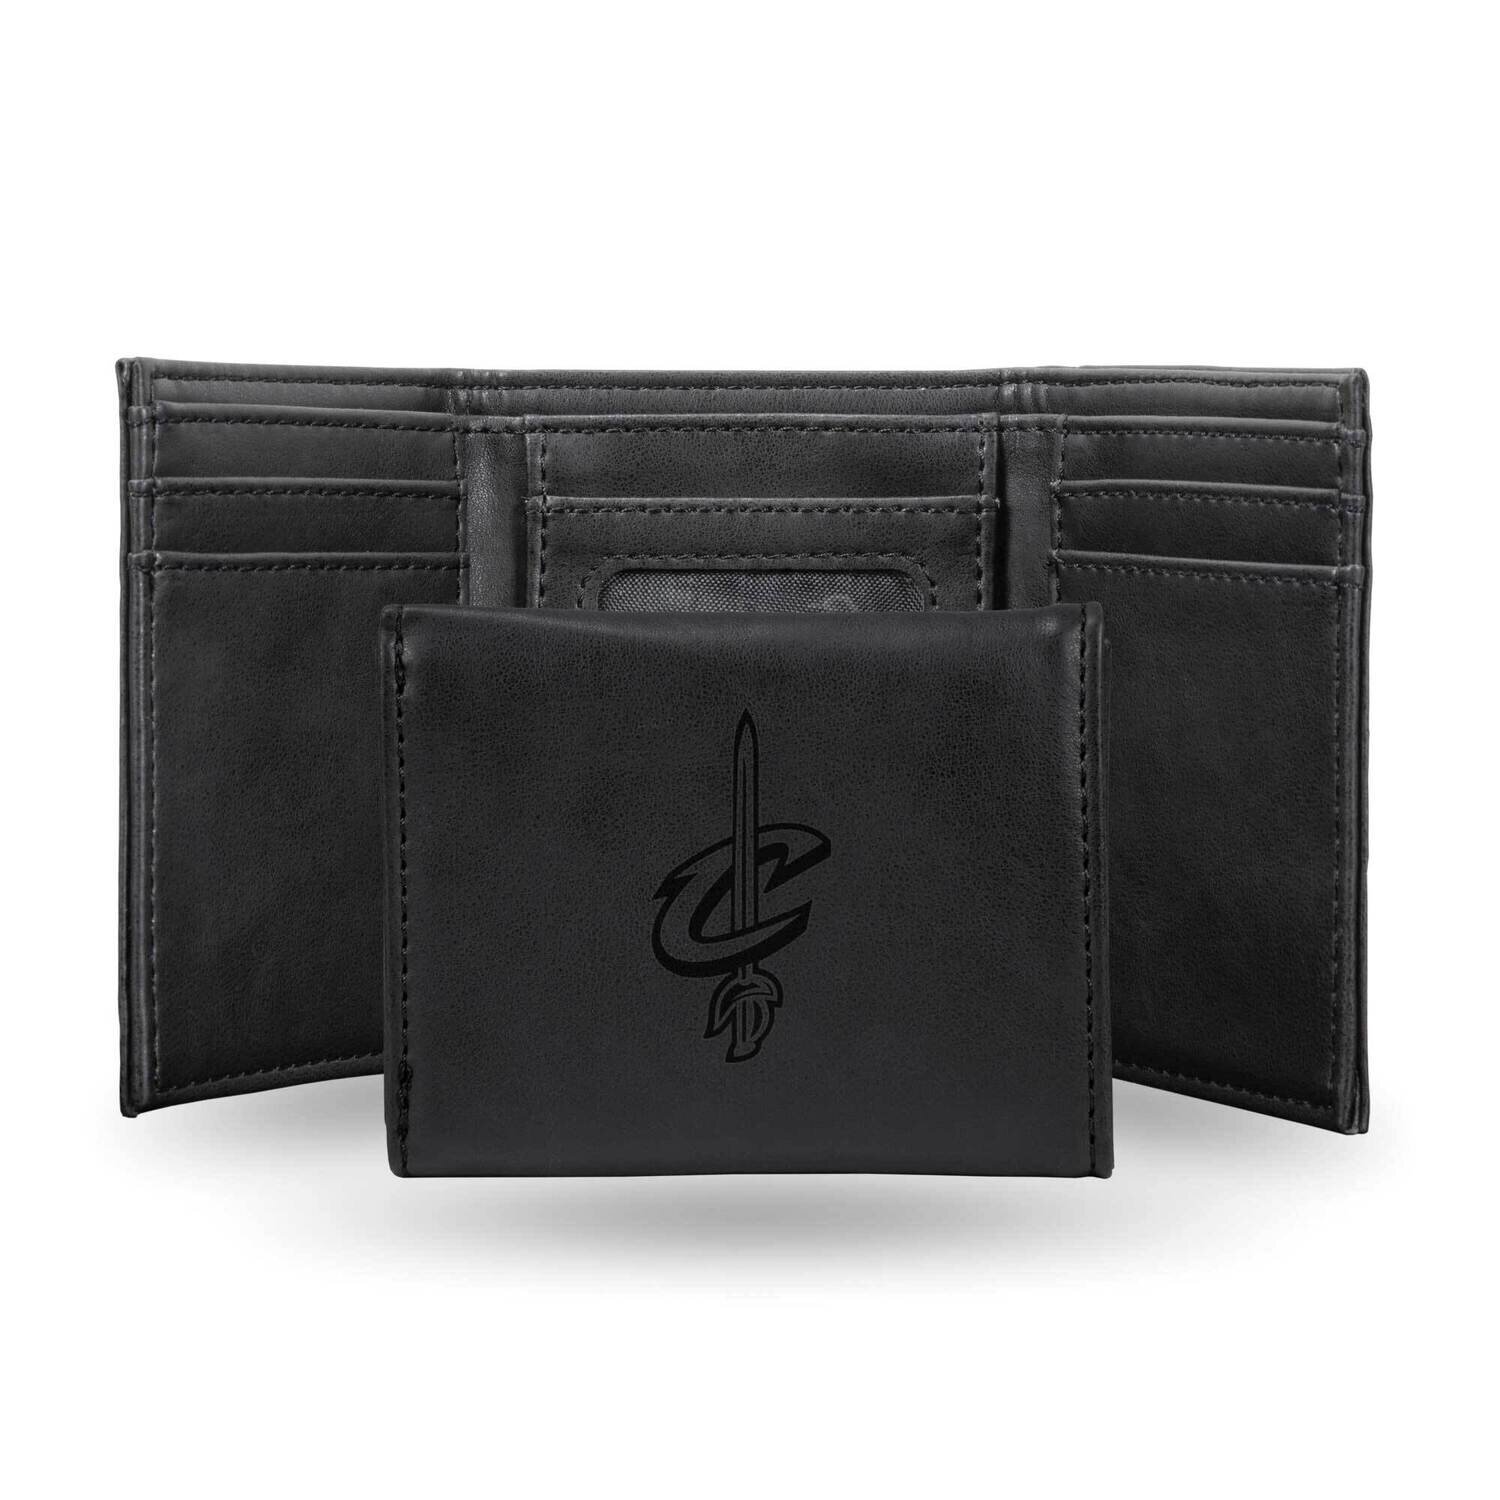 NBA Cleveland Cavaliers Black Faux Leather Trifold Wallet GC7694